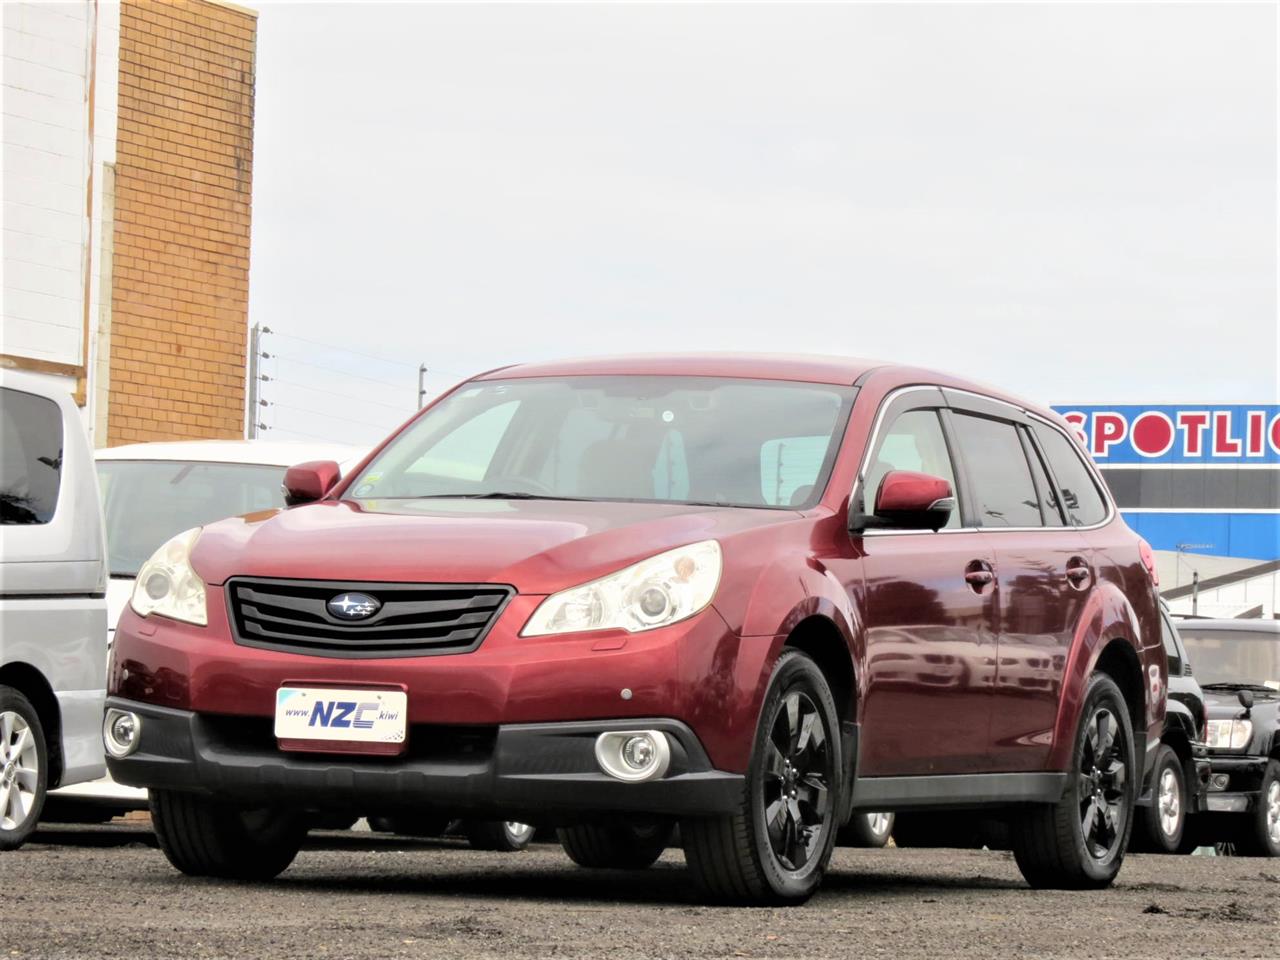 2011 Subaru Outback only $48 weekly